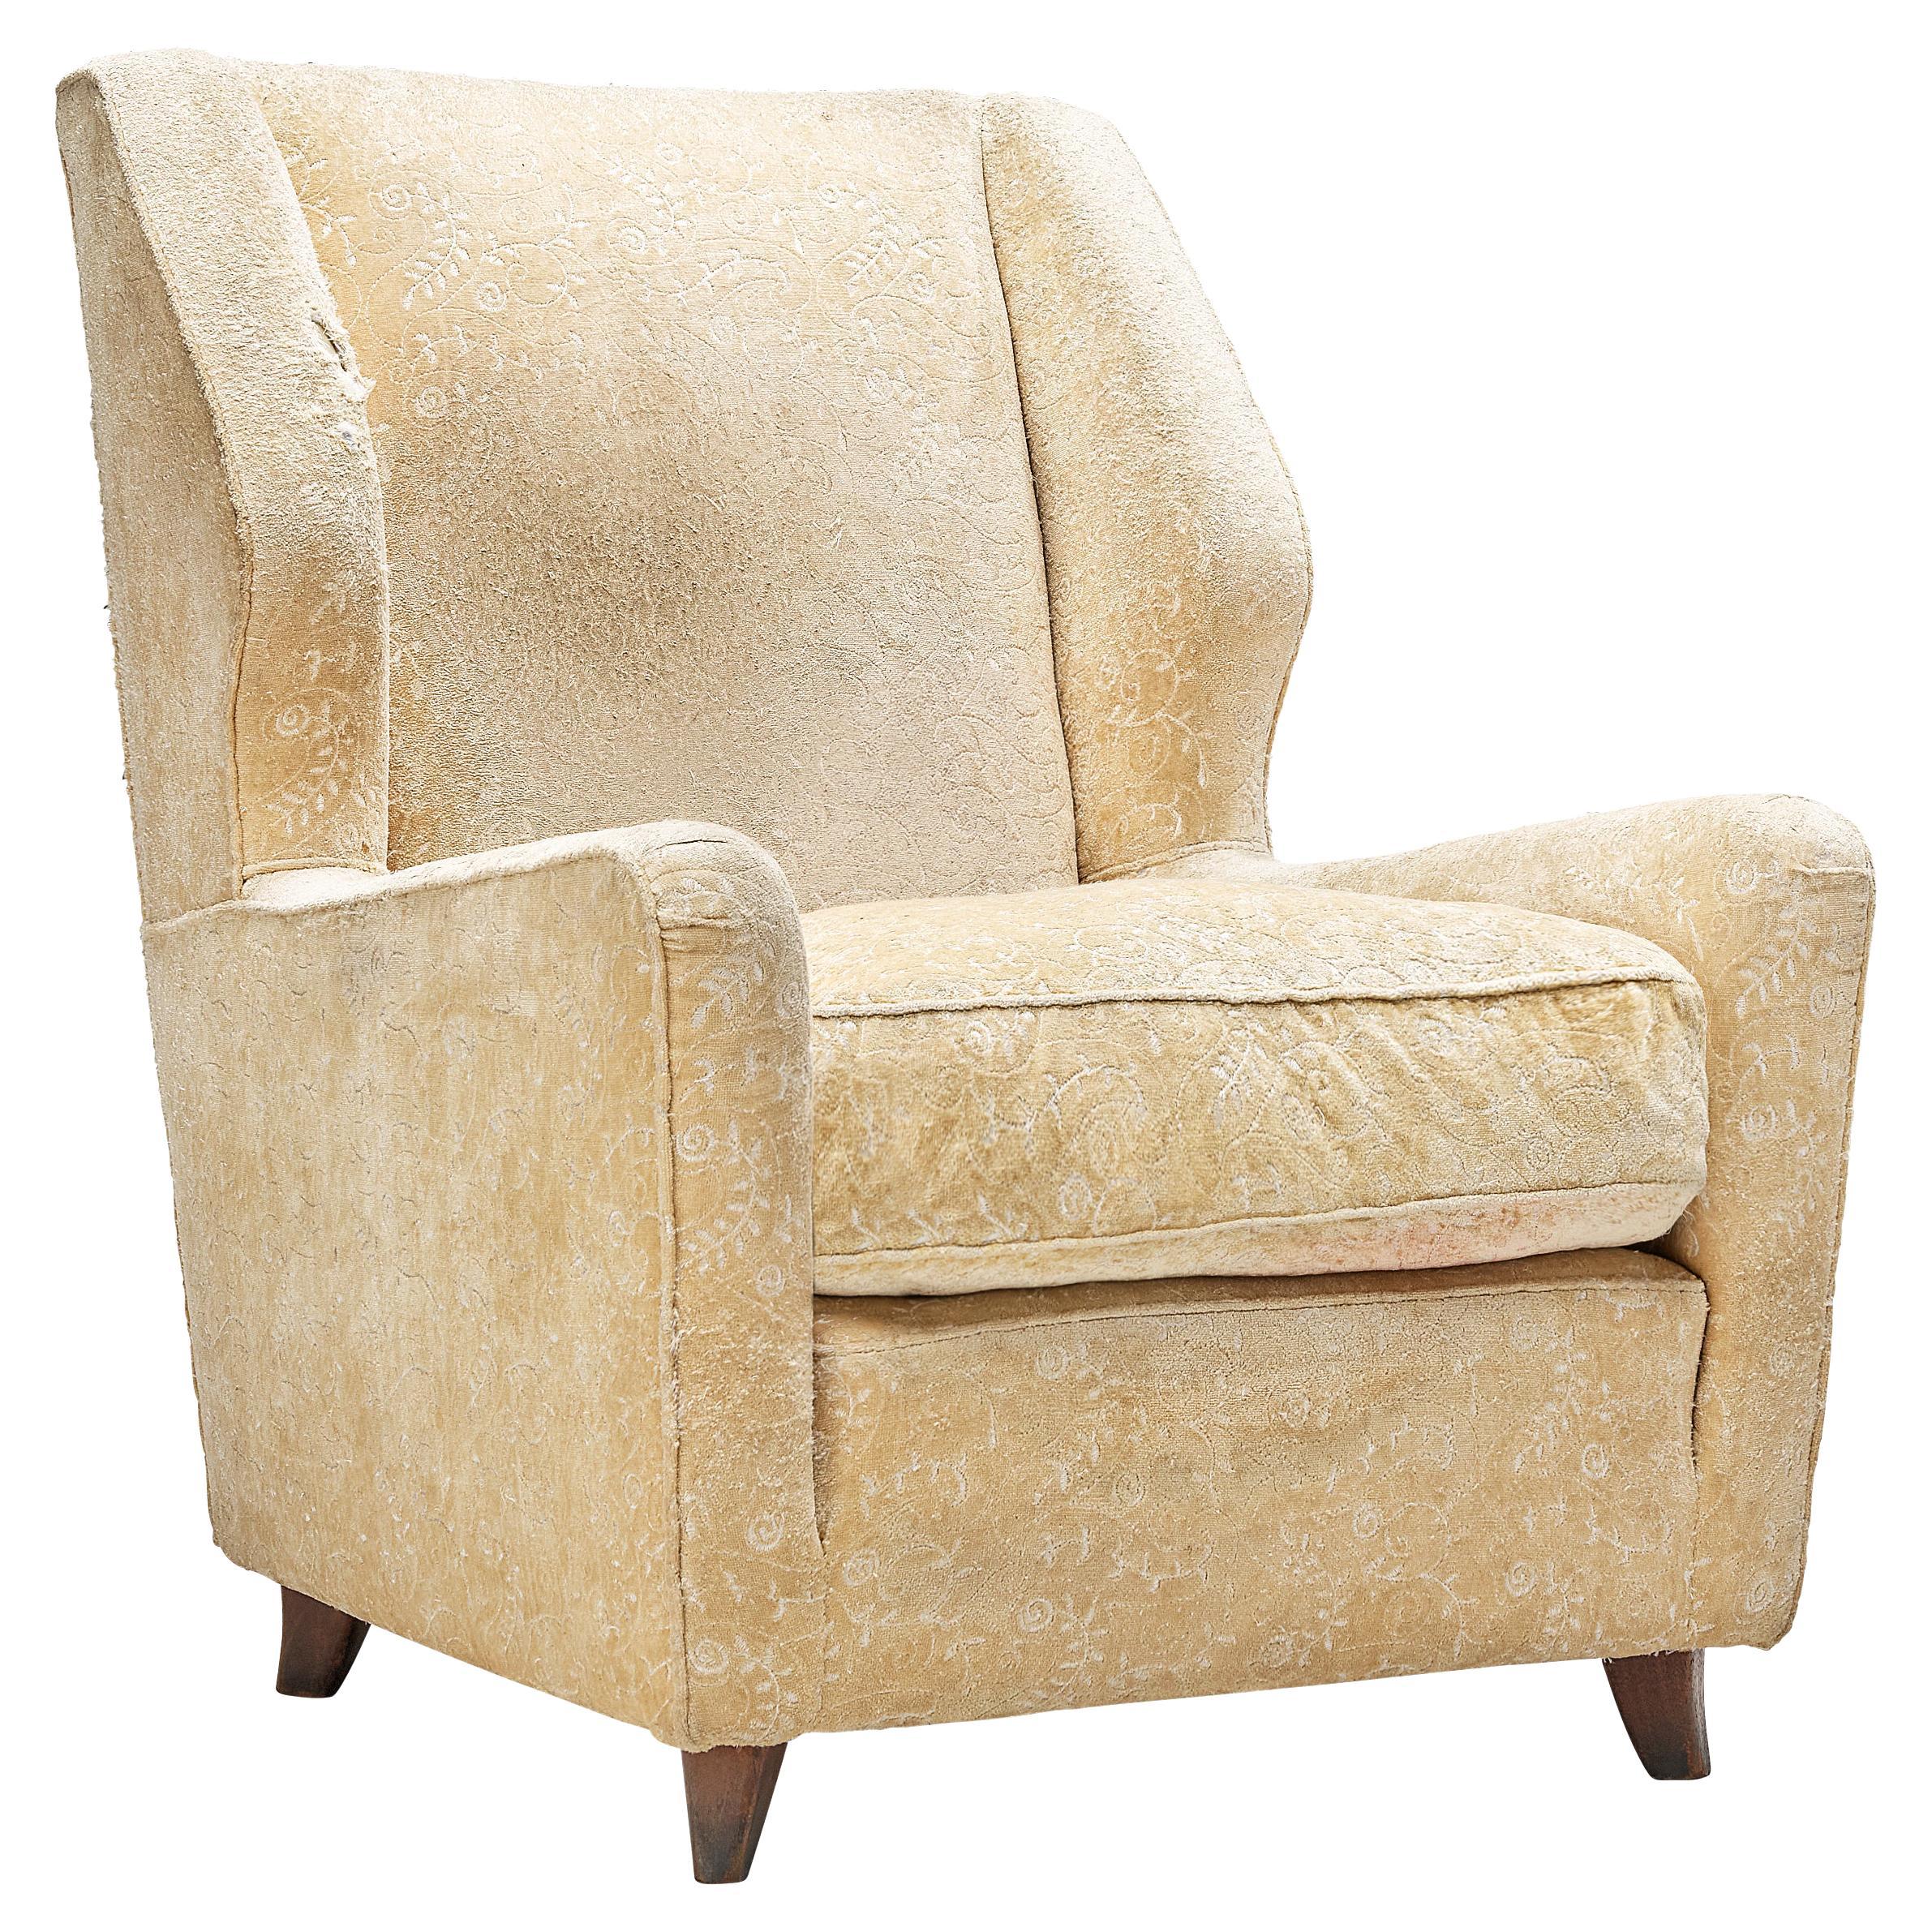 Comfortable Danish Lounge Chair in Bright Fabric Upholstery For Sale